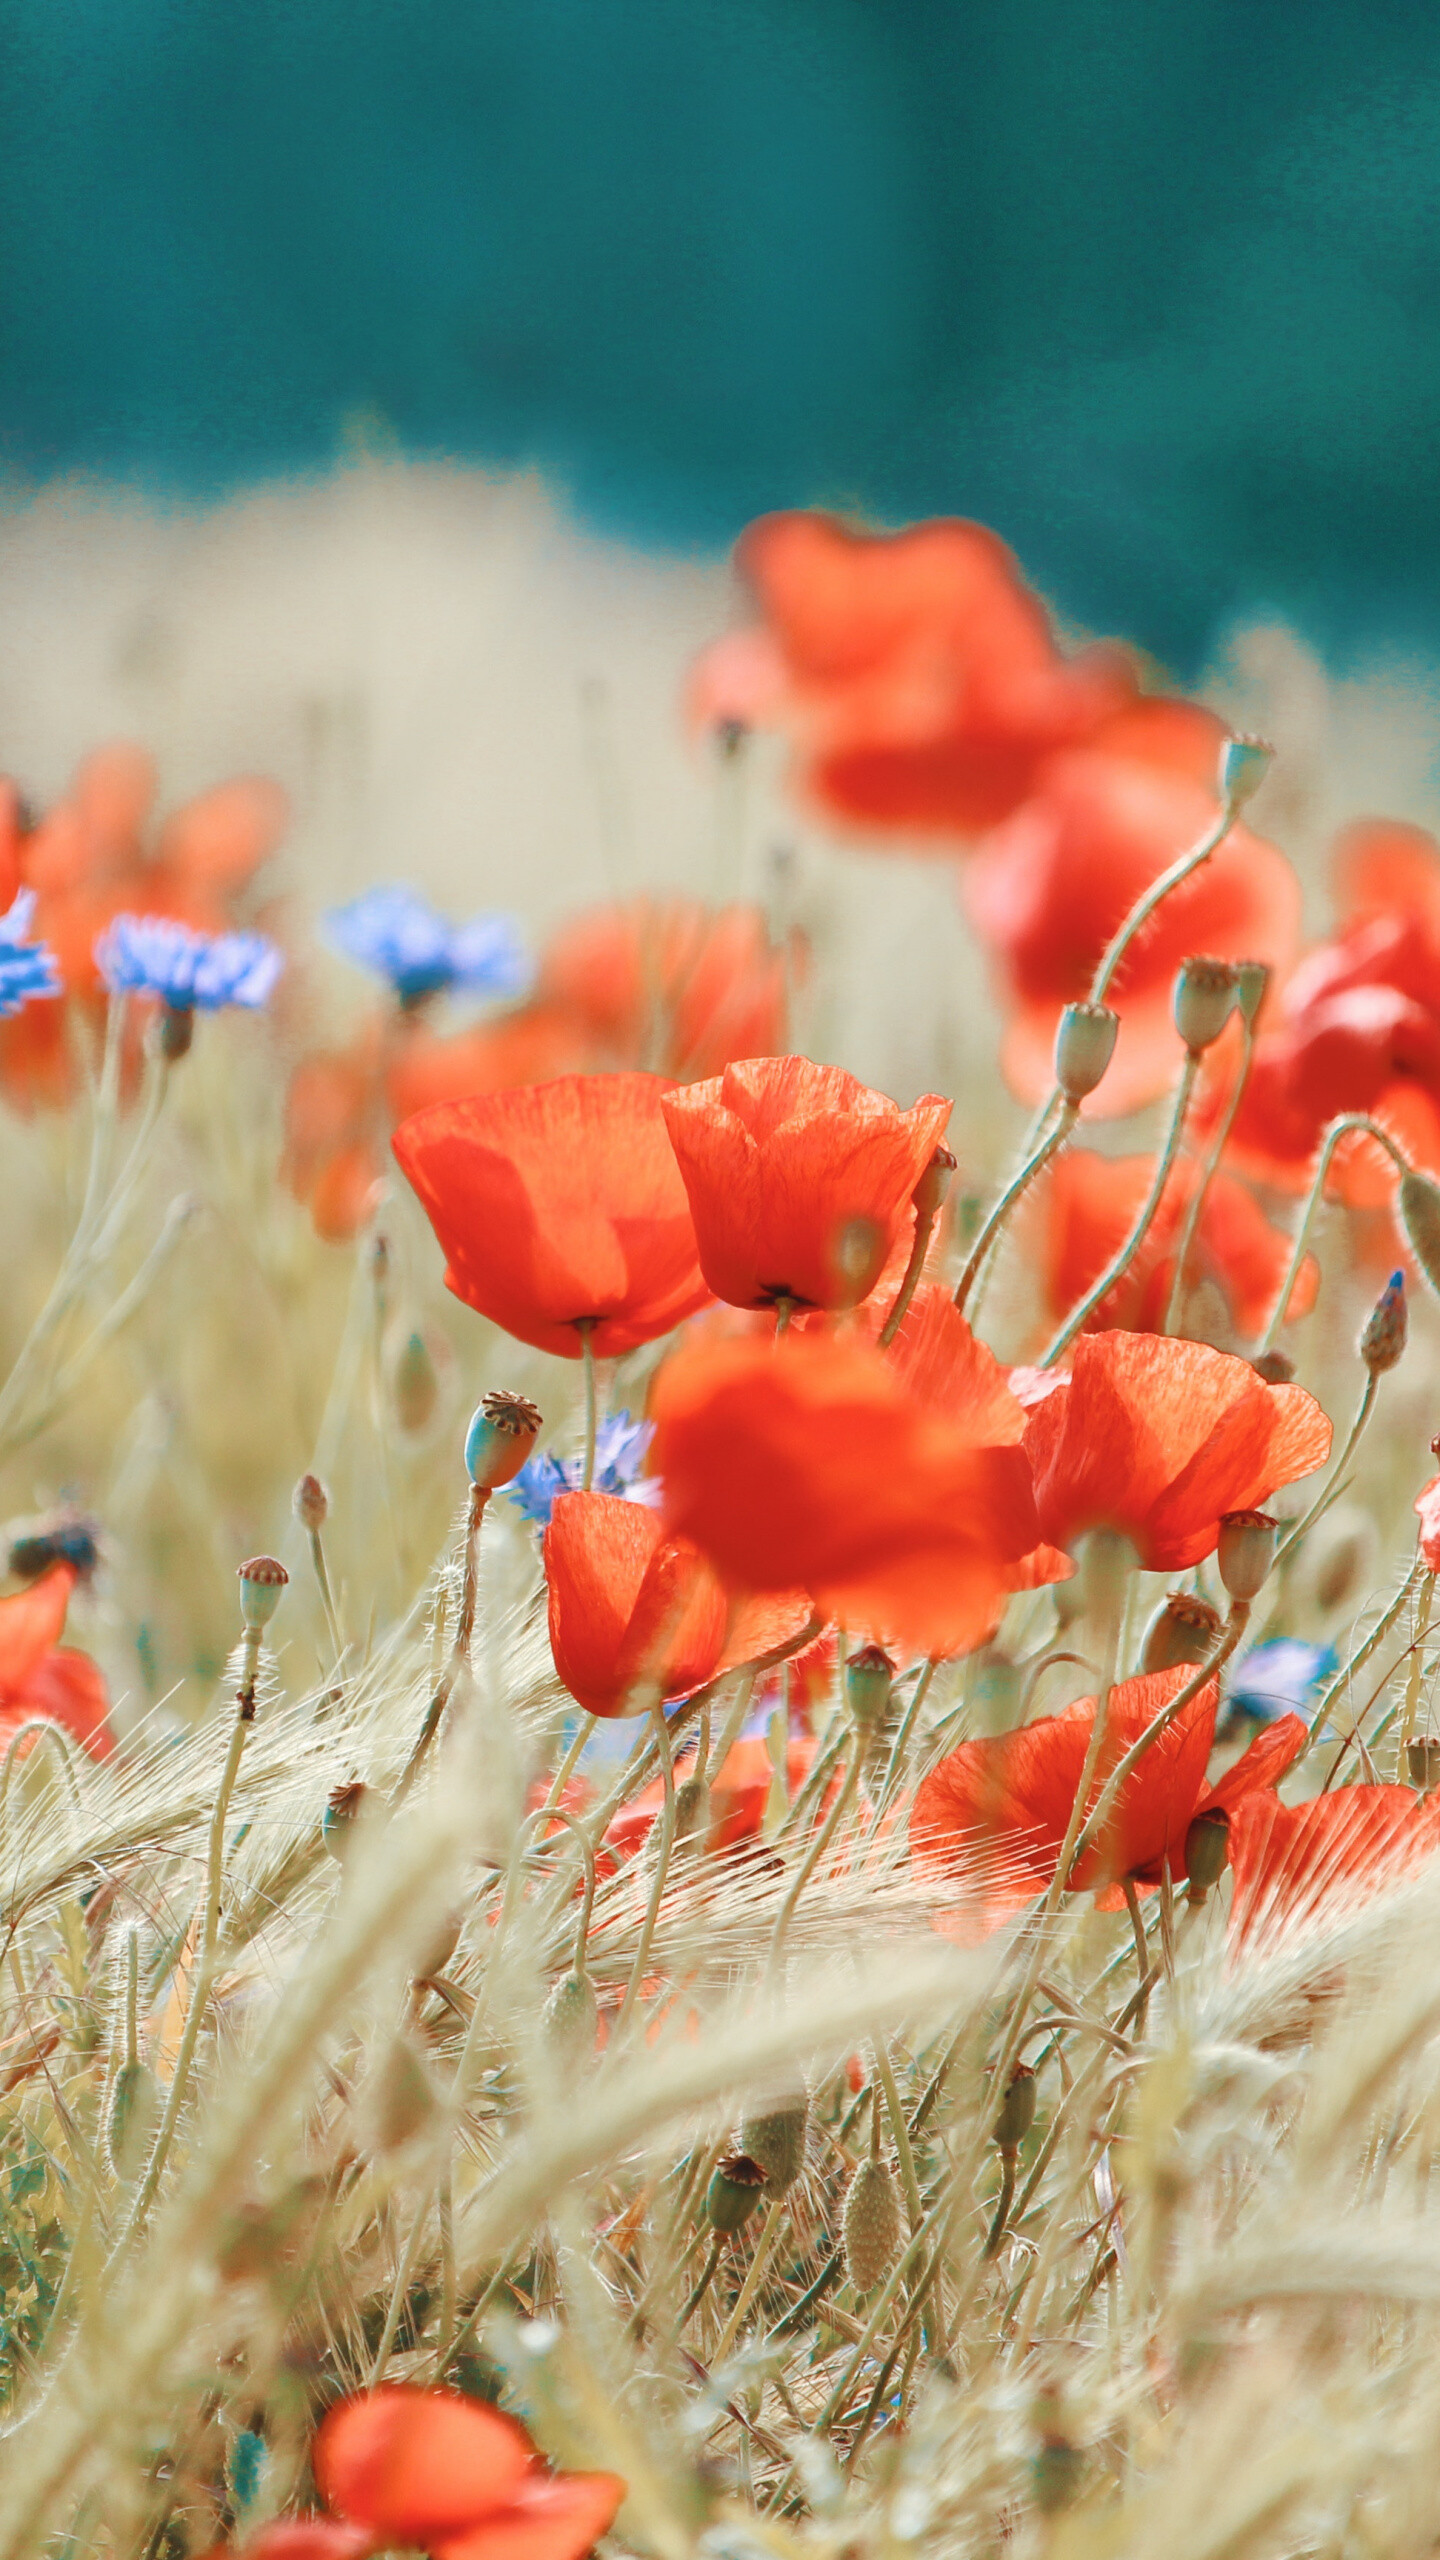 Poppy Flower: Annual and biennial poppies will grow in a wide range of soils, including very poor and even stony ones, where little else grows well. 1440x2560 HD Wallpaper.